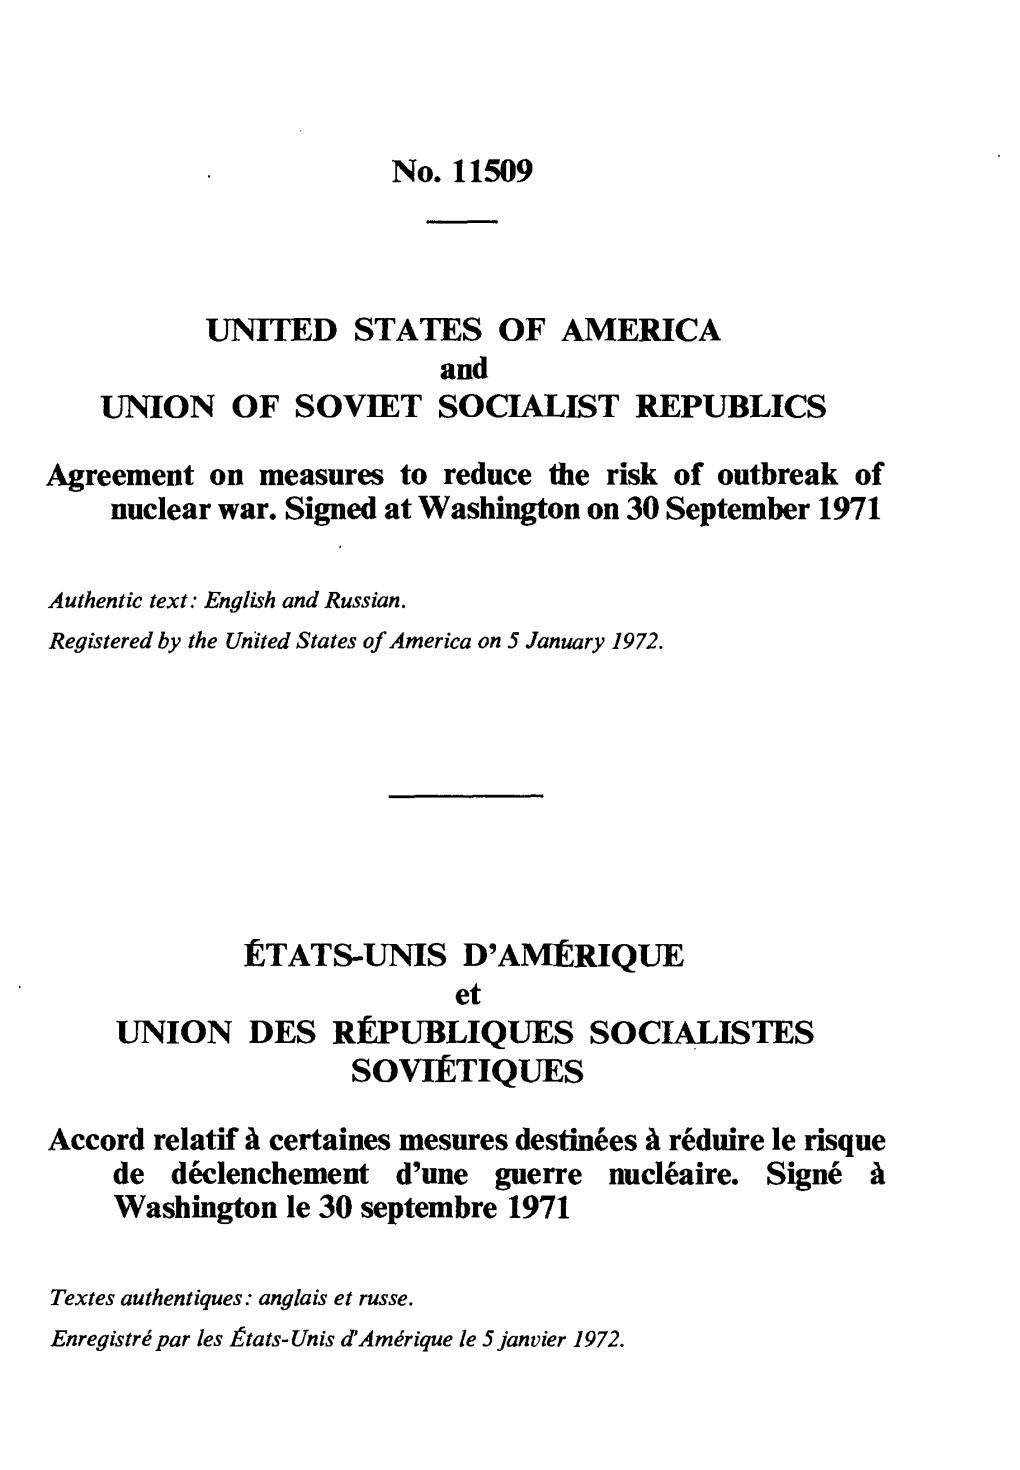 No. 11509 UNITED STATES of AMERICA and UNION of SOVIET